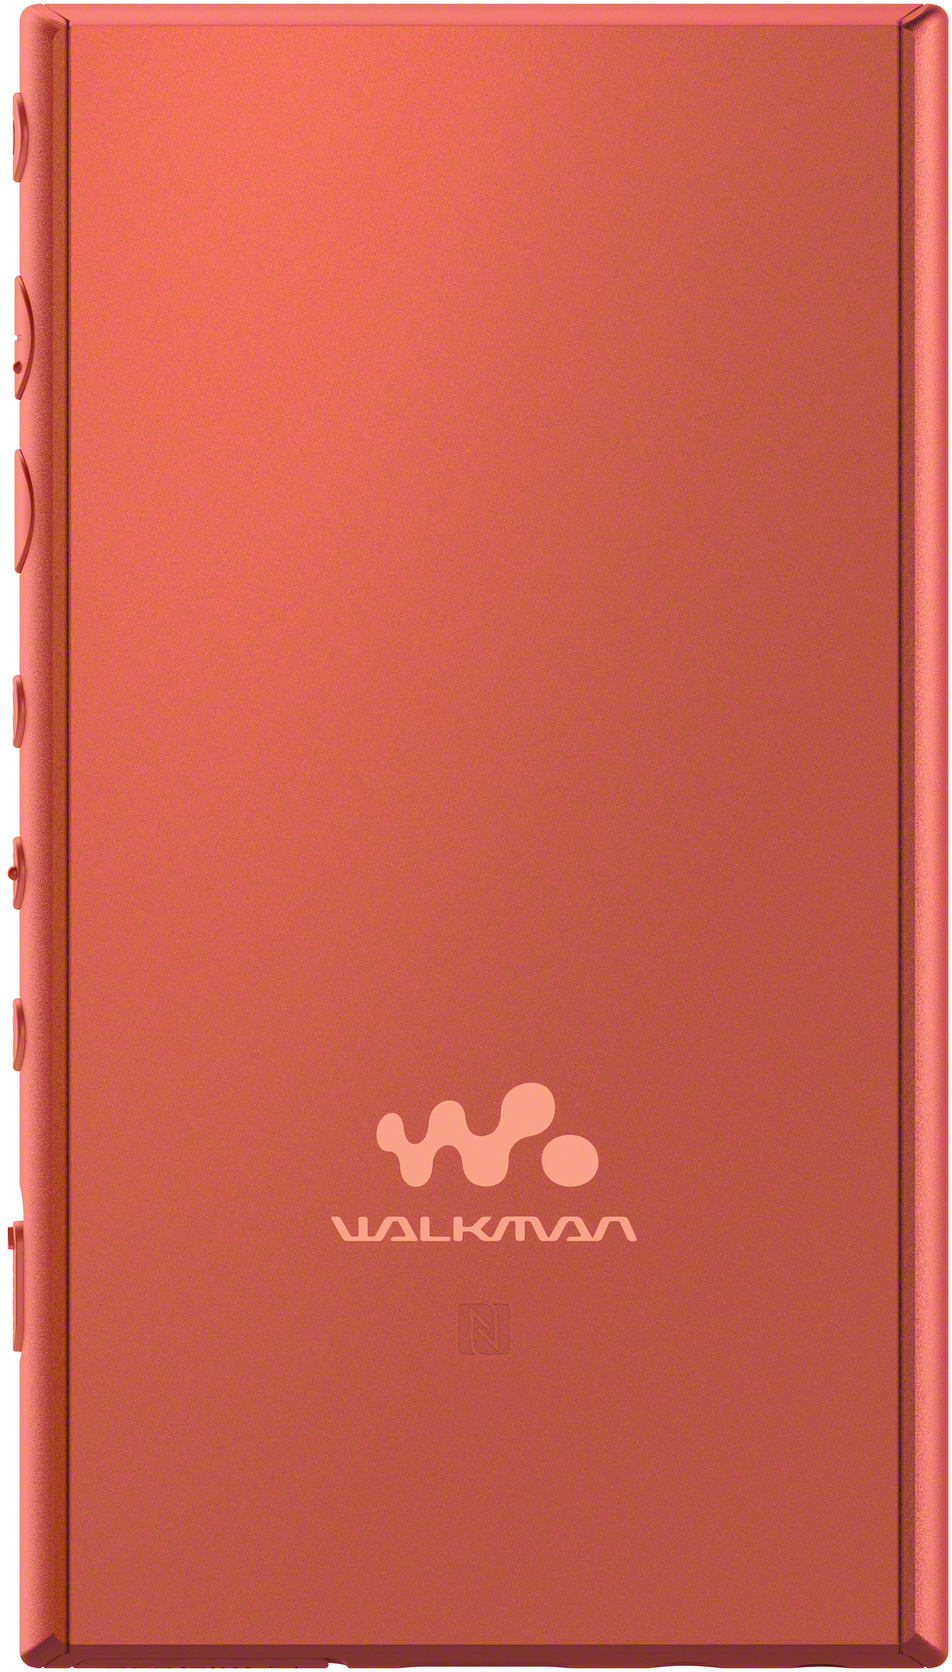 GB, 9.0 Walkman Mp3-Player NW-A105 Orange SONY Android 16